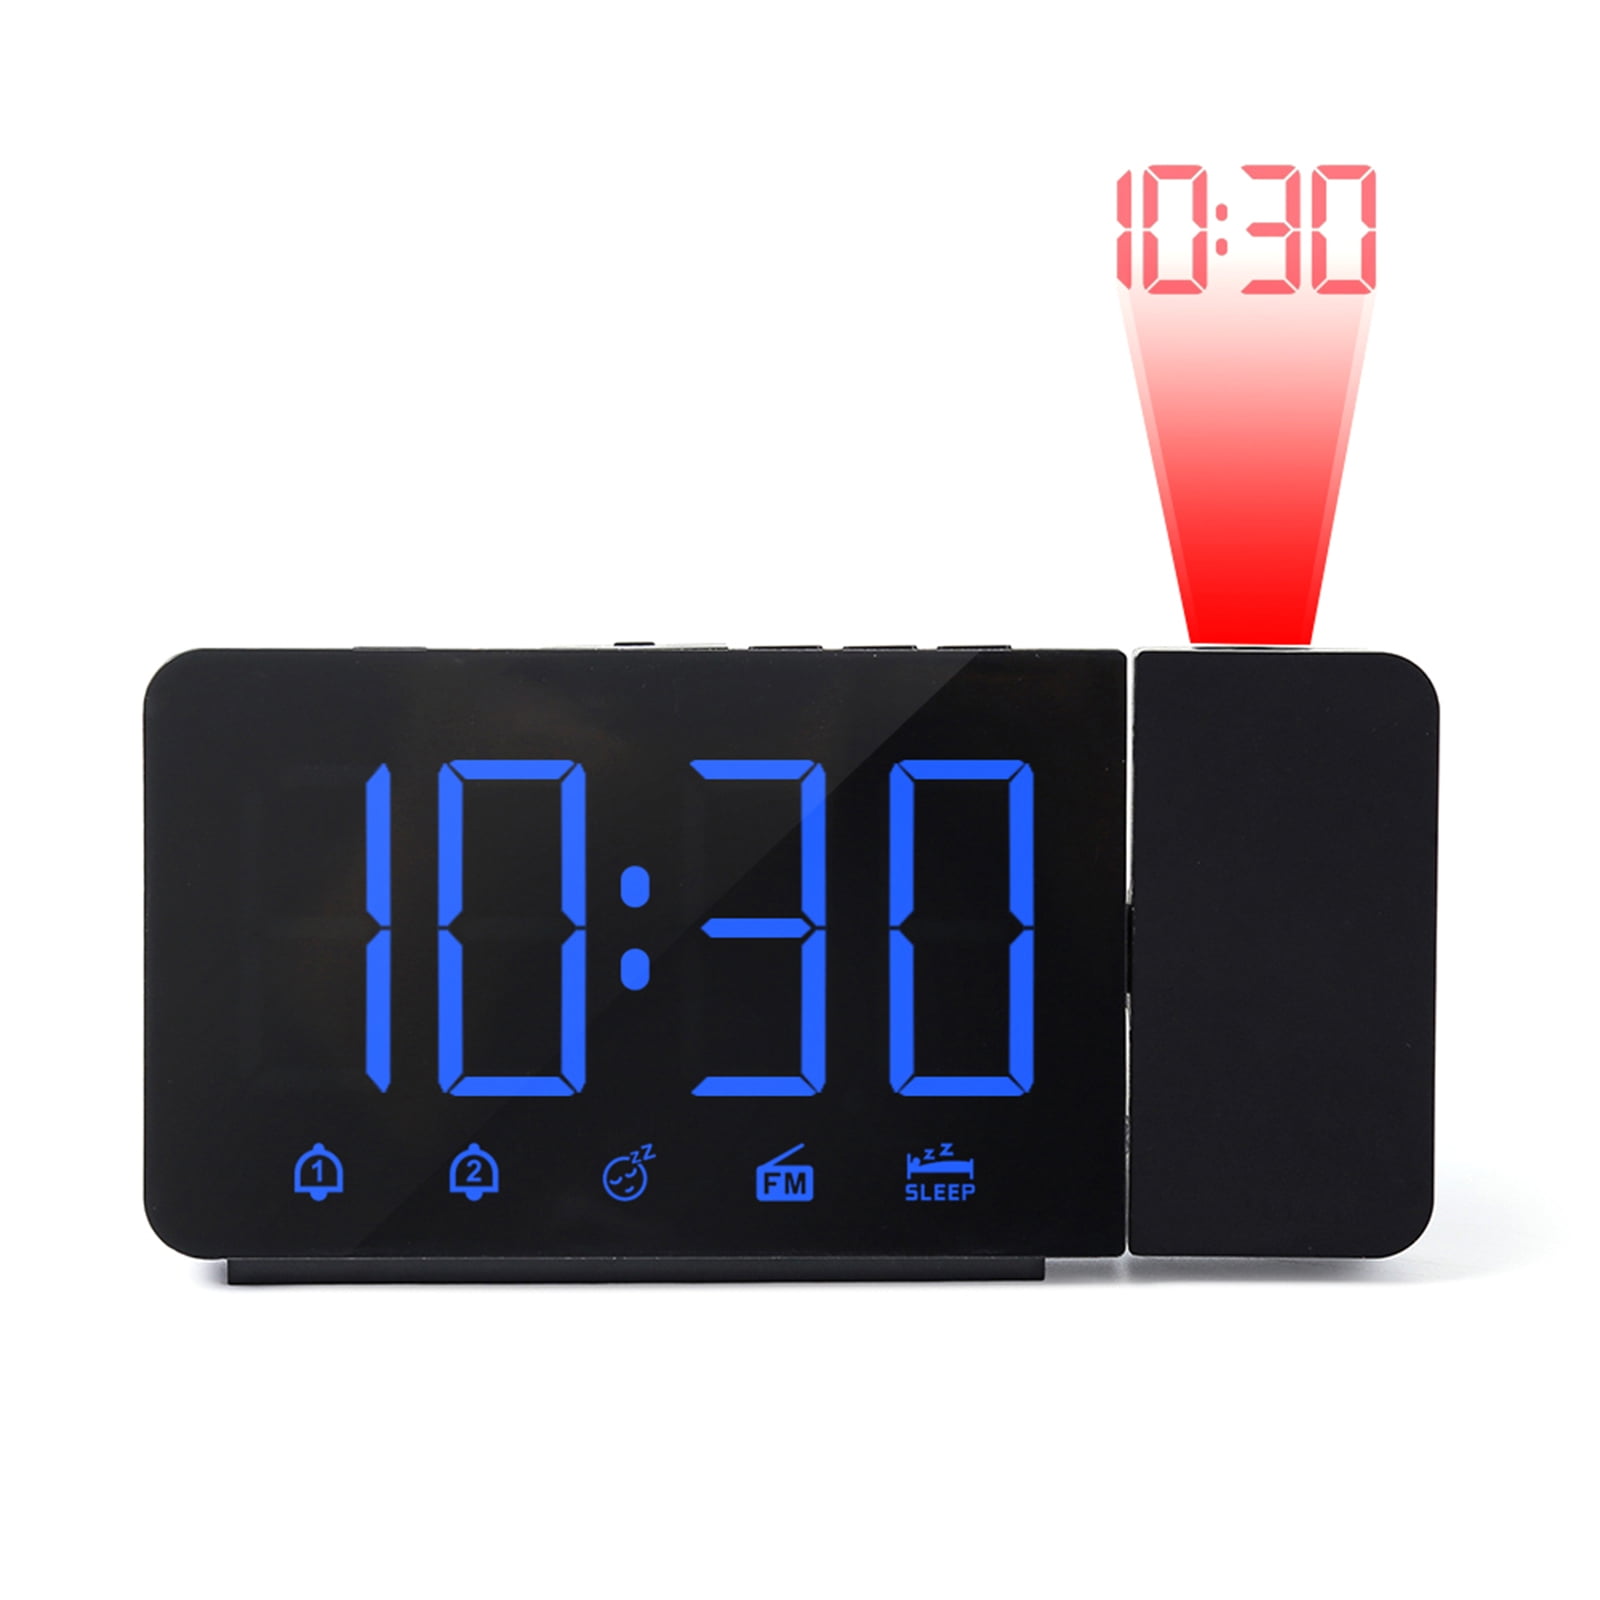 LED Projection Clock Time 3.7″ LCD Display Thermometer Whether Alarm Calendar UK 